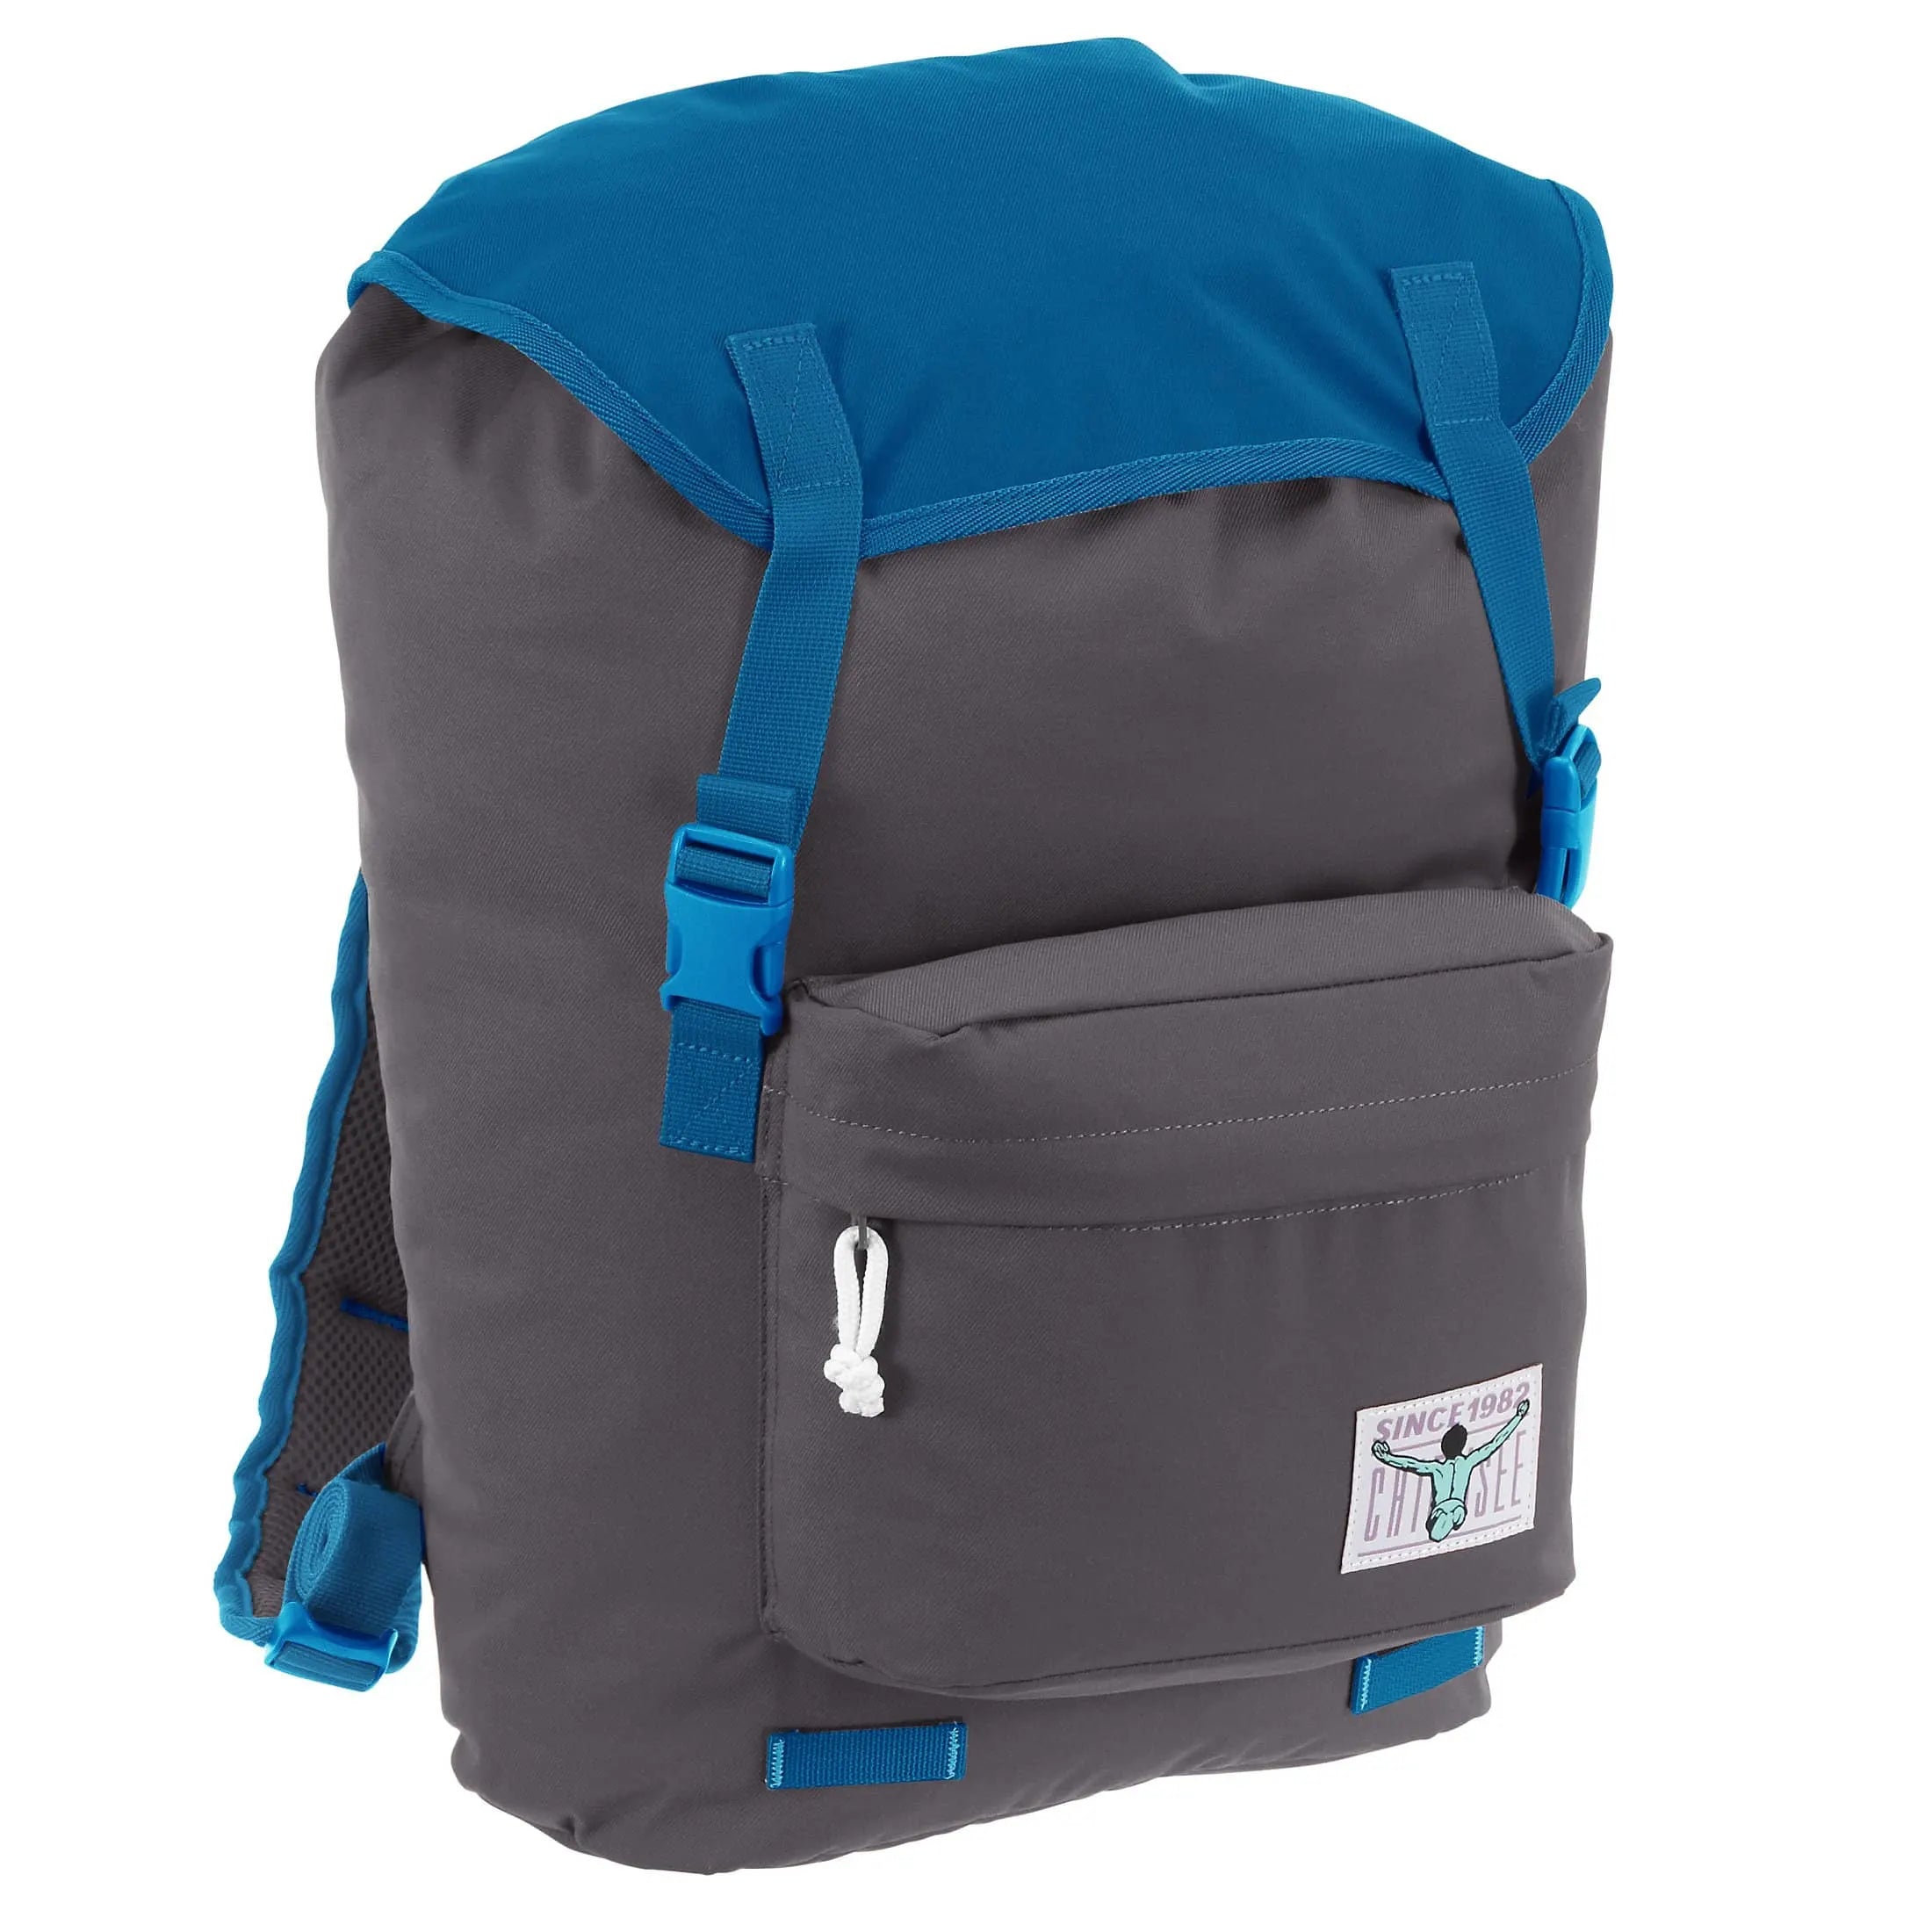 Chiemsee Urban Explorer Riga backpack with laptop compartment 42 cm - excalibur blue saphire